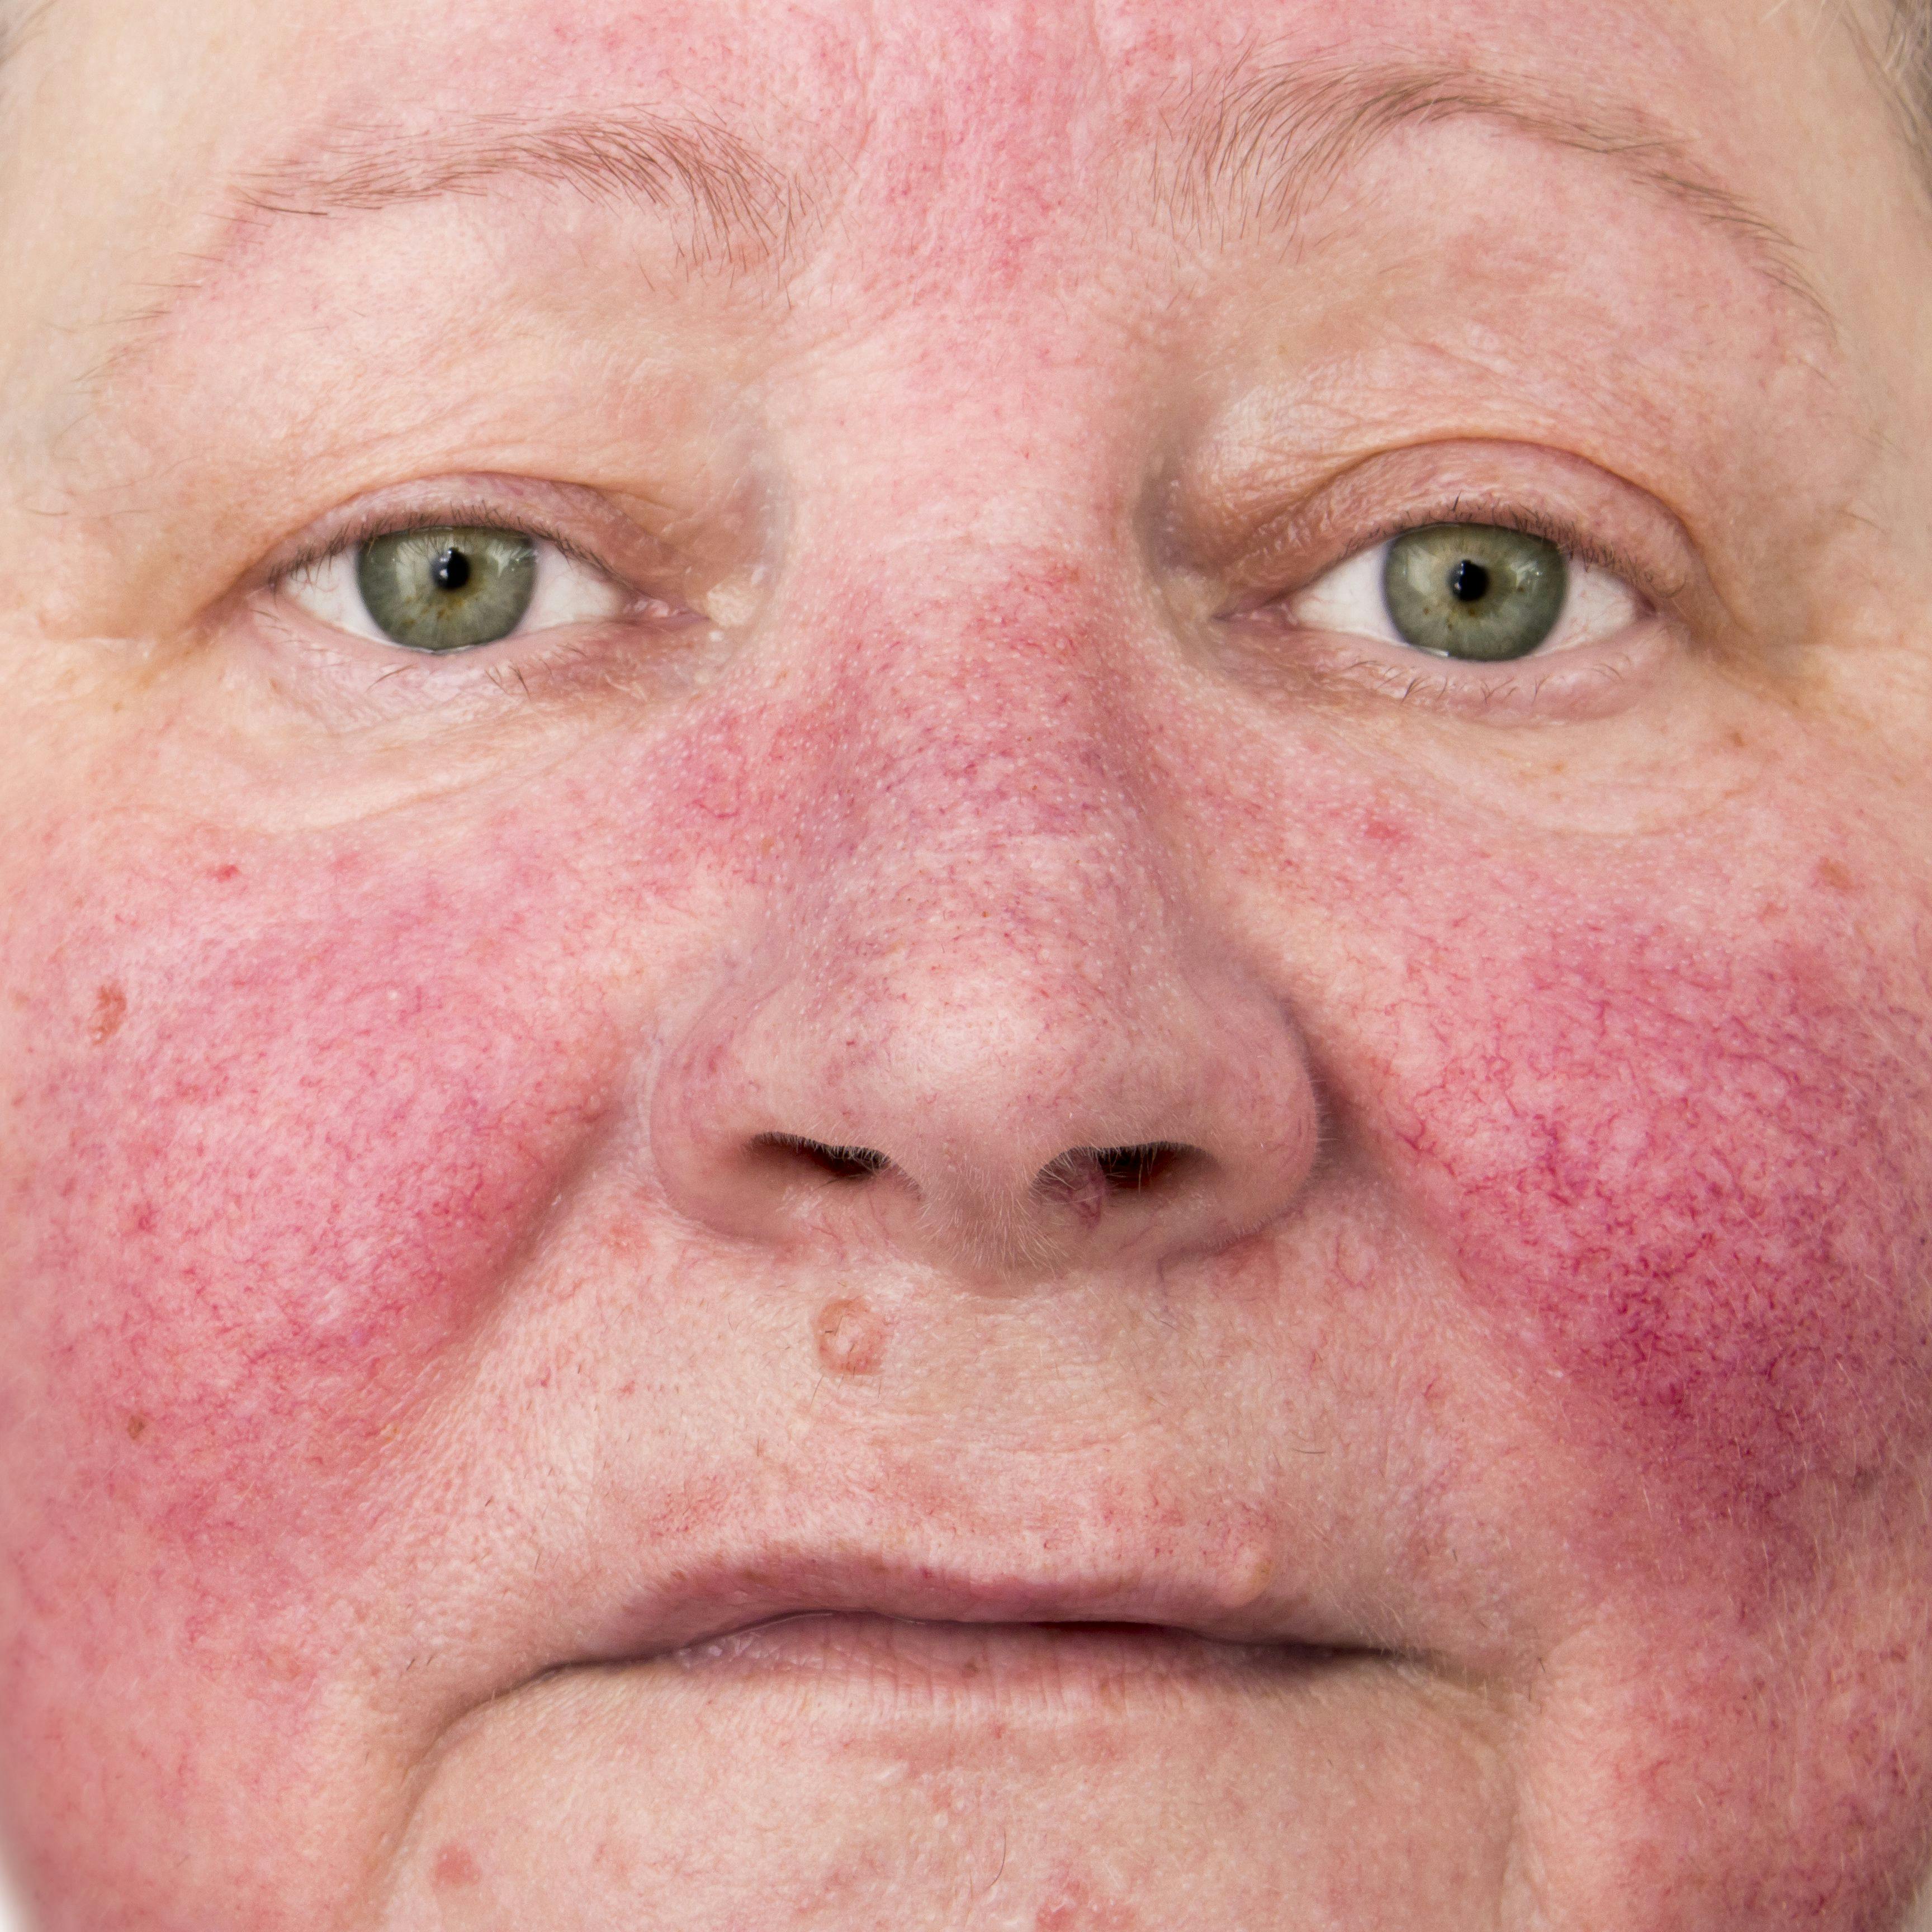 FDA Approves Epsolay for Inflammatory Lesions of Rosacea